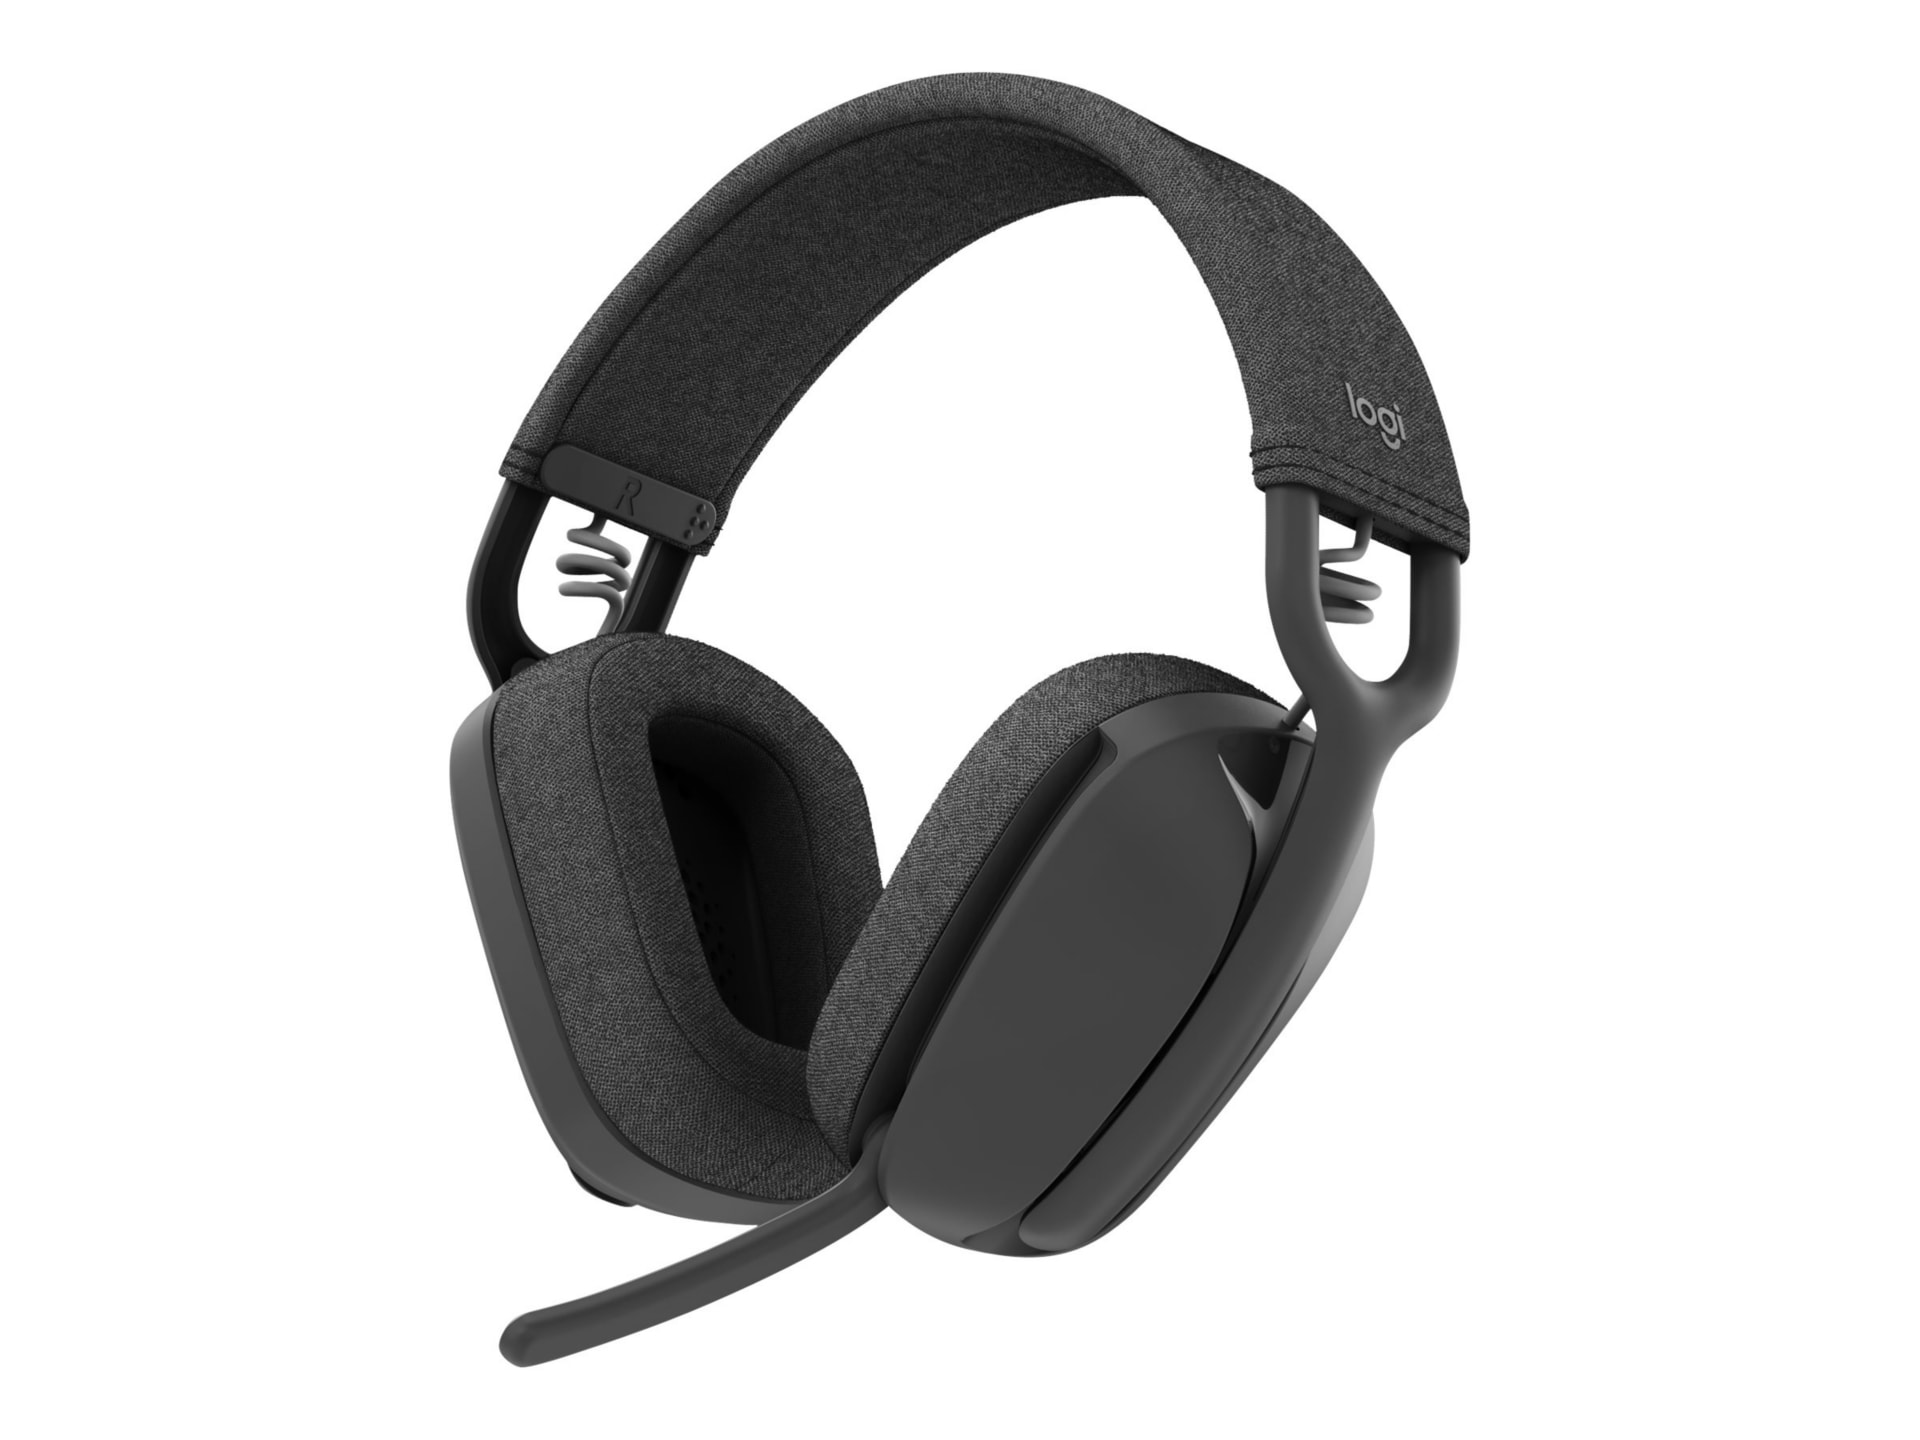 sigte Lager græsplæne Logitech Zone Vibe Wireless Bluetooth headphones with noise-canceling mic,  USB-A, USB-C, Mac/PC - Graphite - headset - 981-001198 - Wireless Headsets  - CDW.com